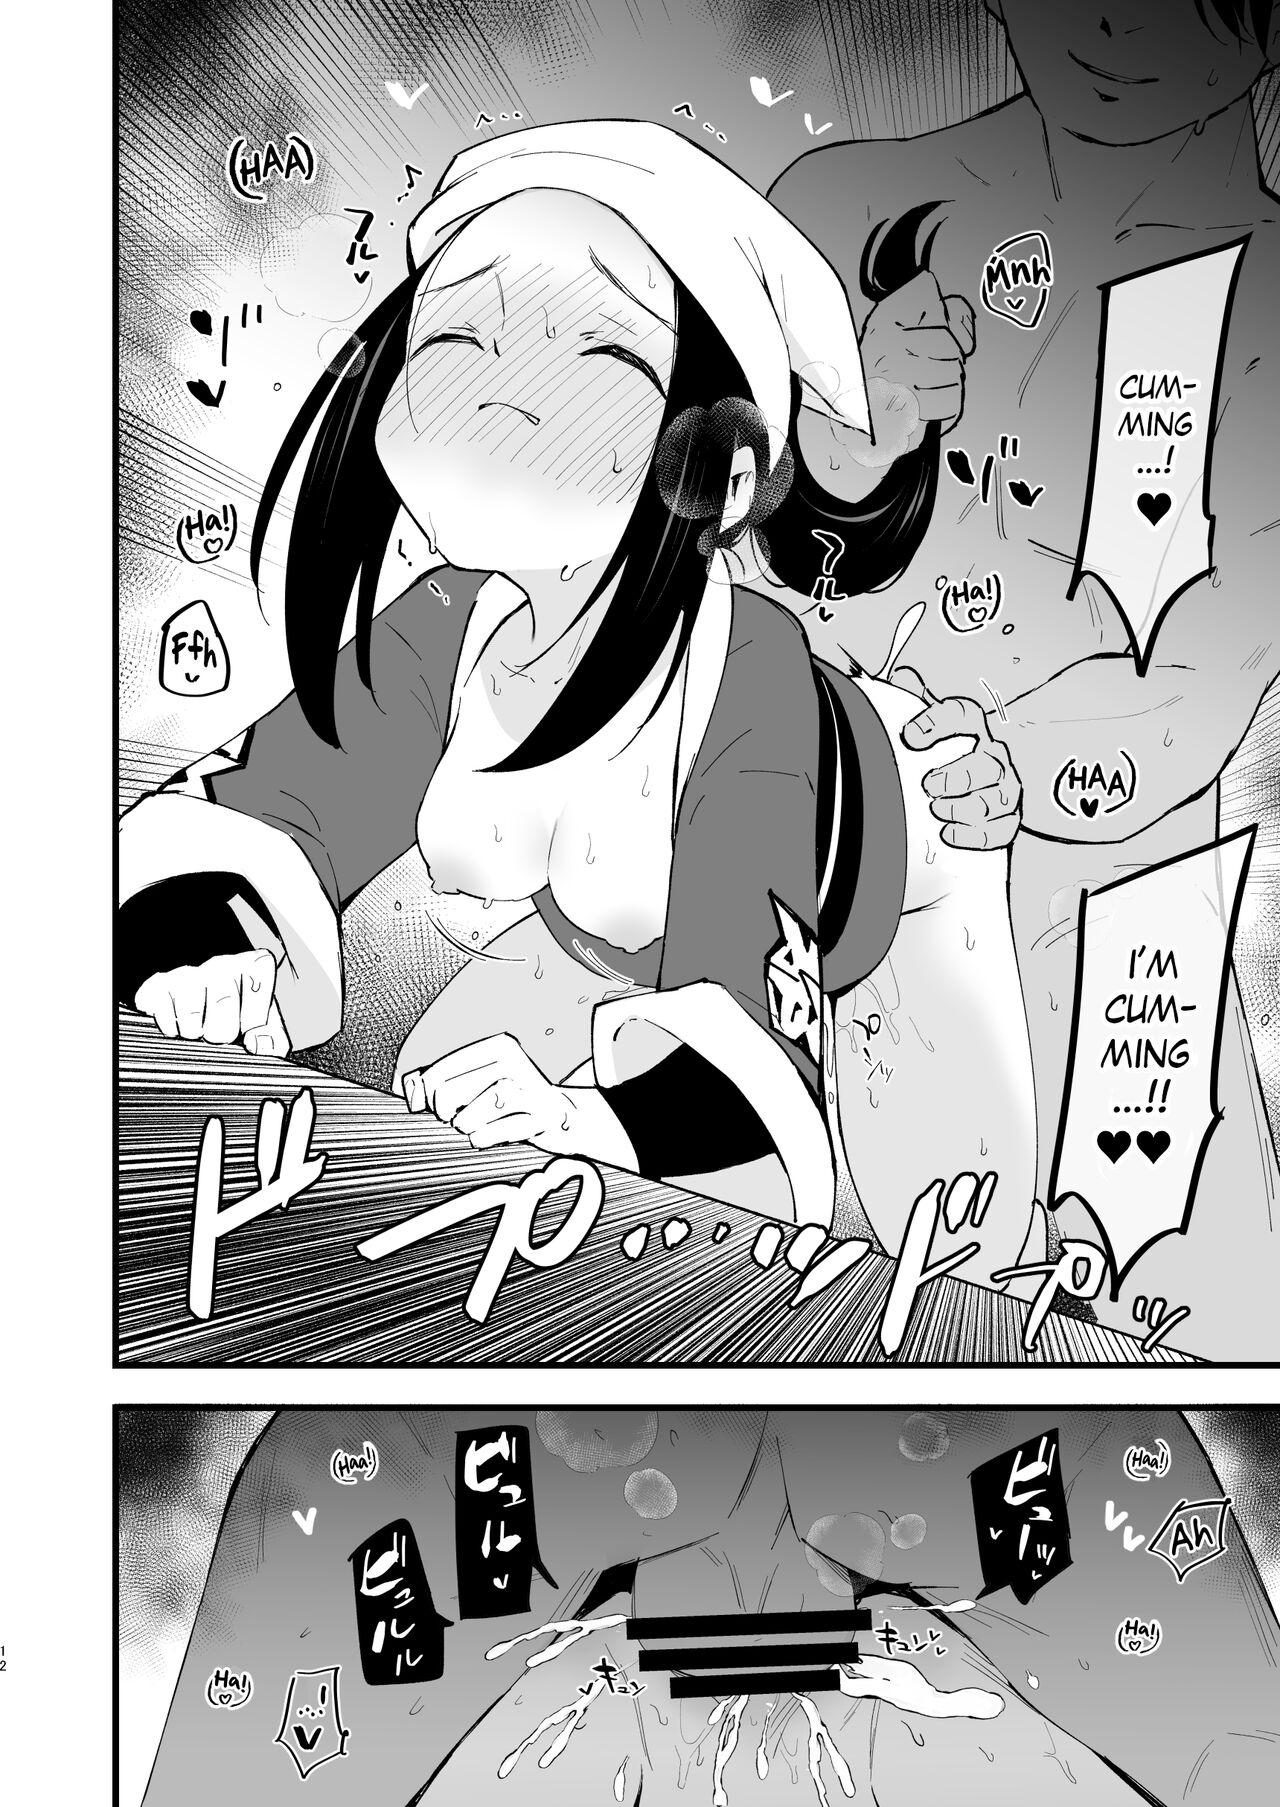 Perverted Hisui Tensei-roku | Records of my reincarnation in Hisui - Pokemon | pocket monsters Asses - Page 11